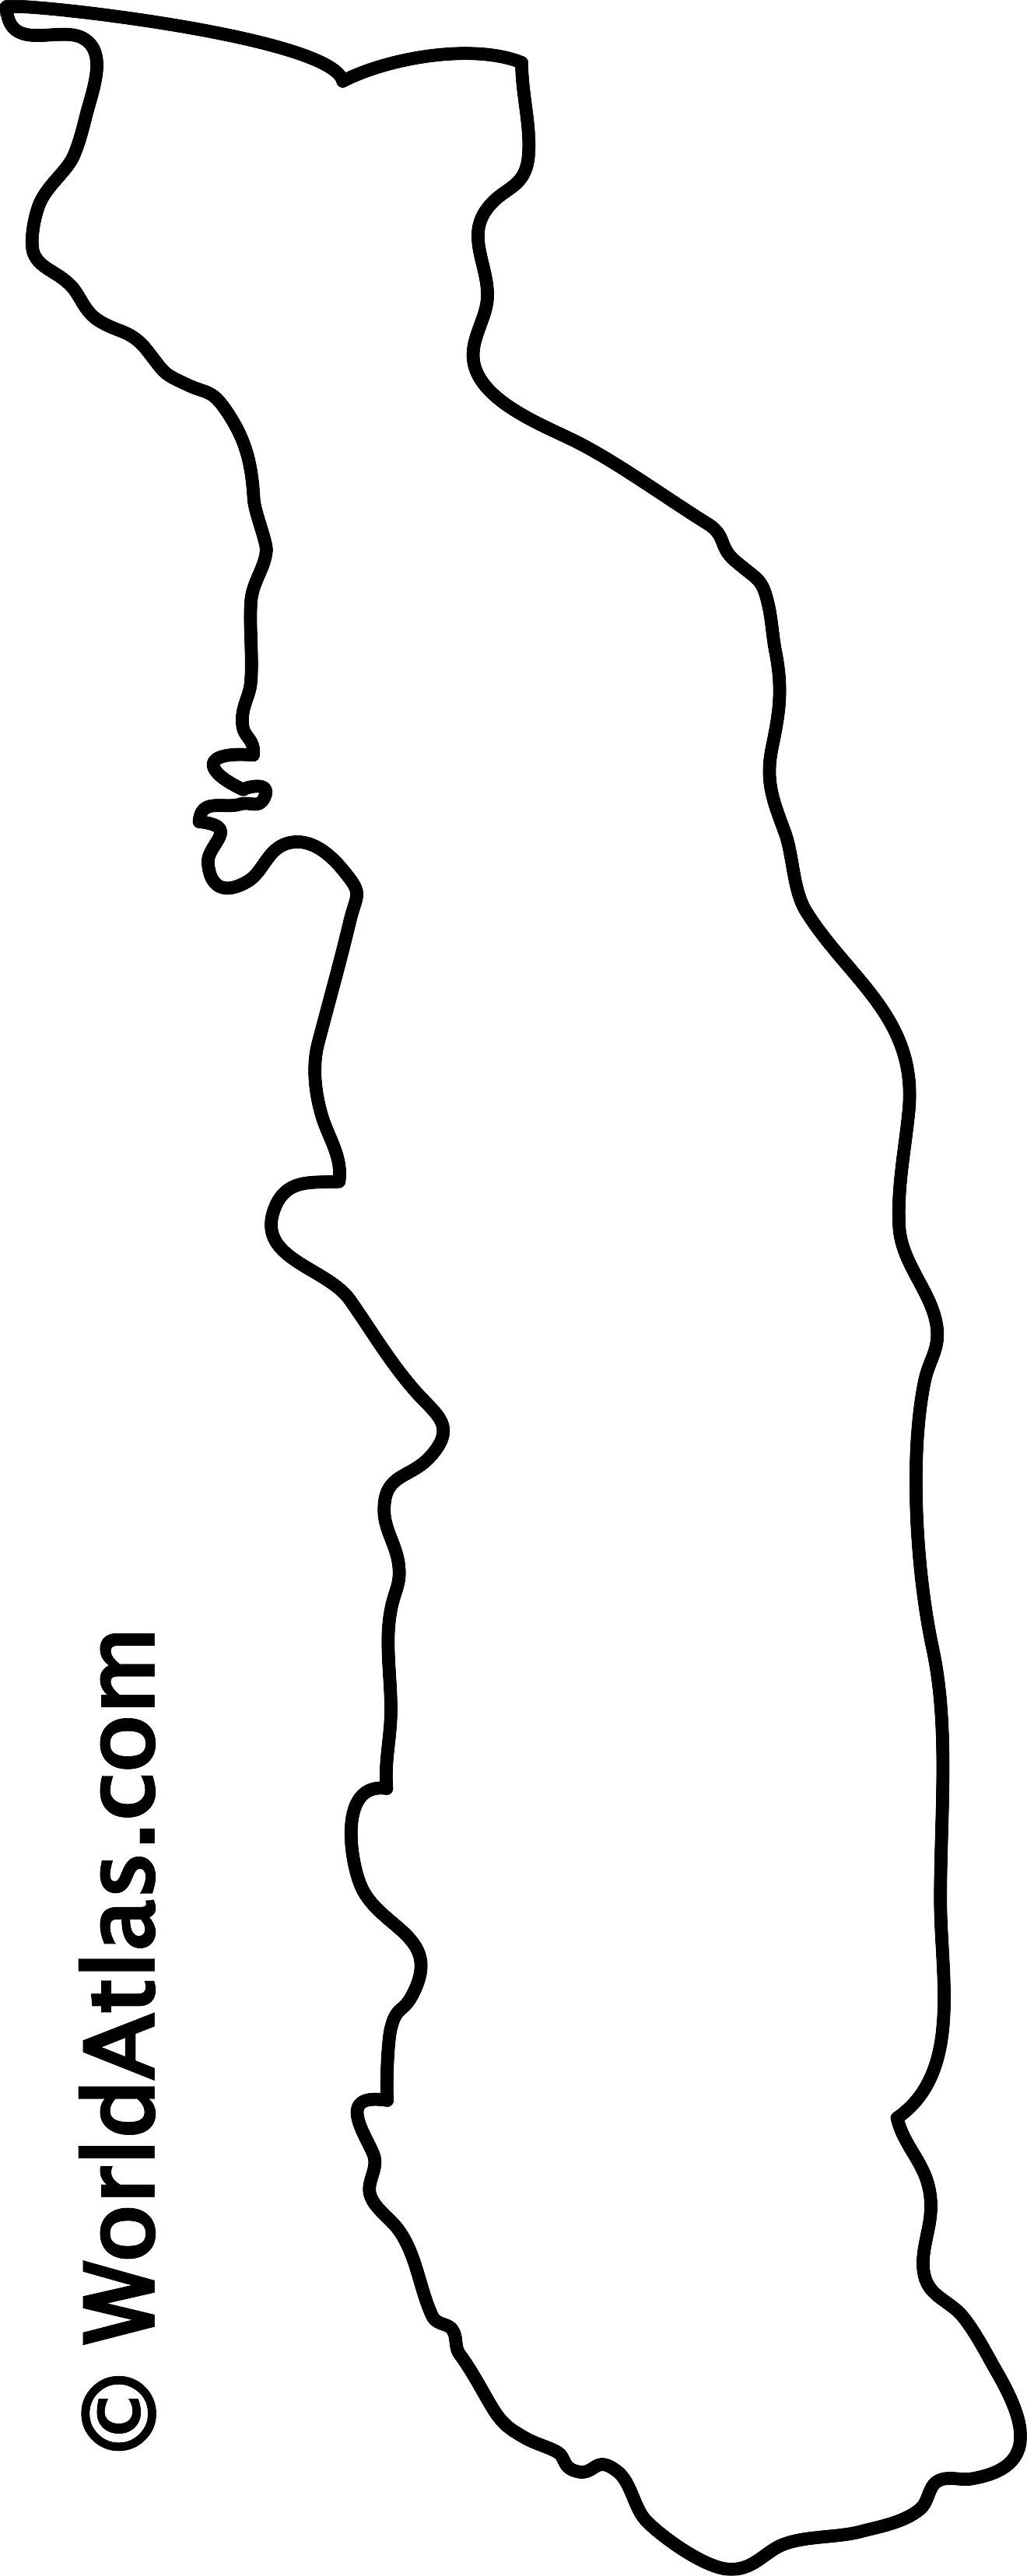 Blank Outline Map of Togo